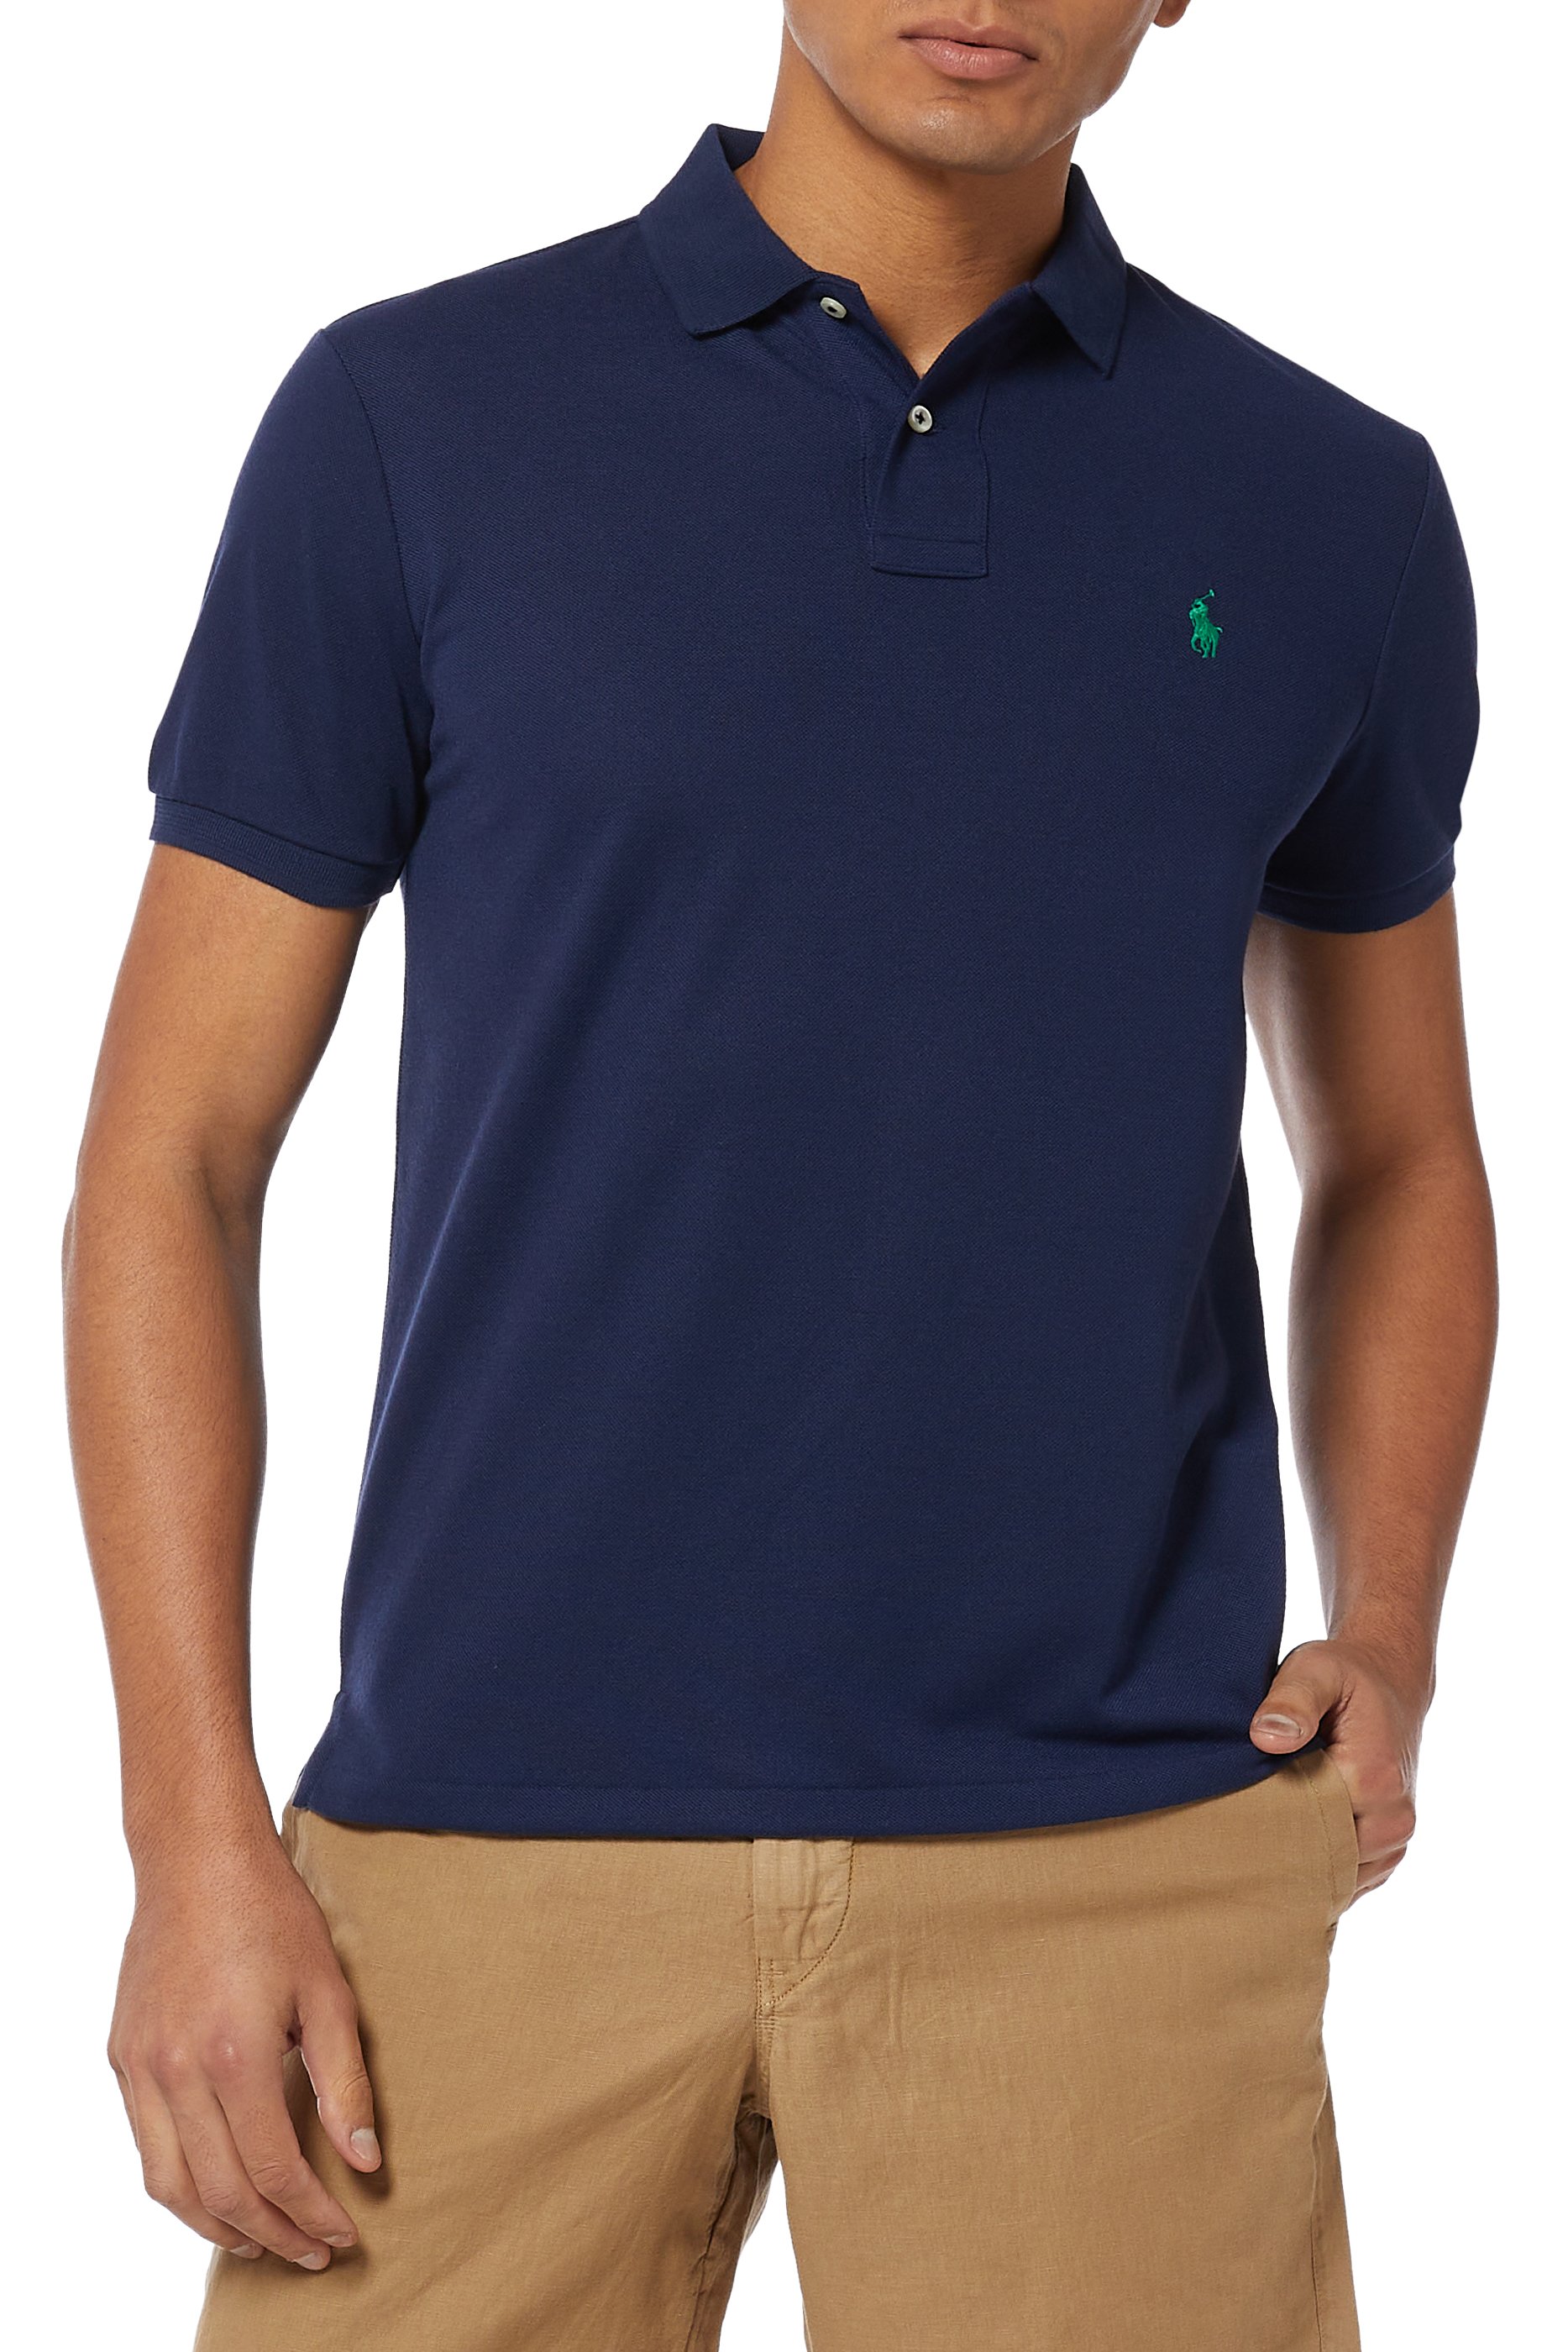 Buy Polo Ralph Lauren The Earth Polo - Mens for AED 365.00 Polos ...